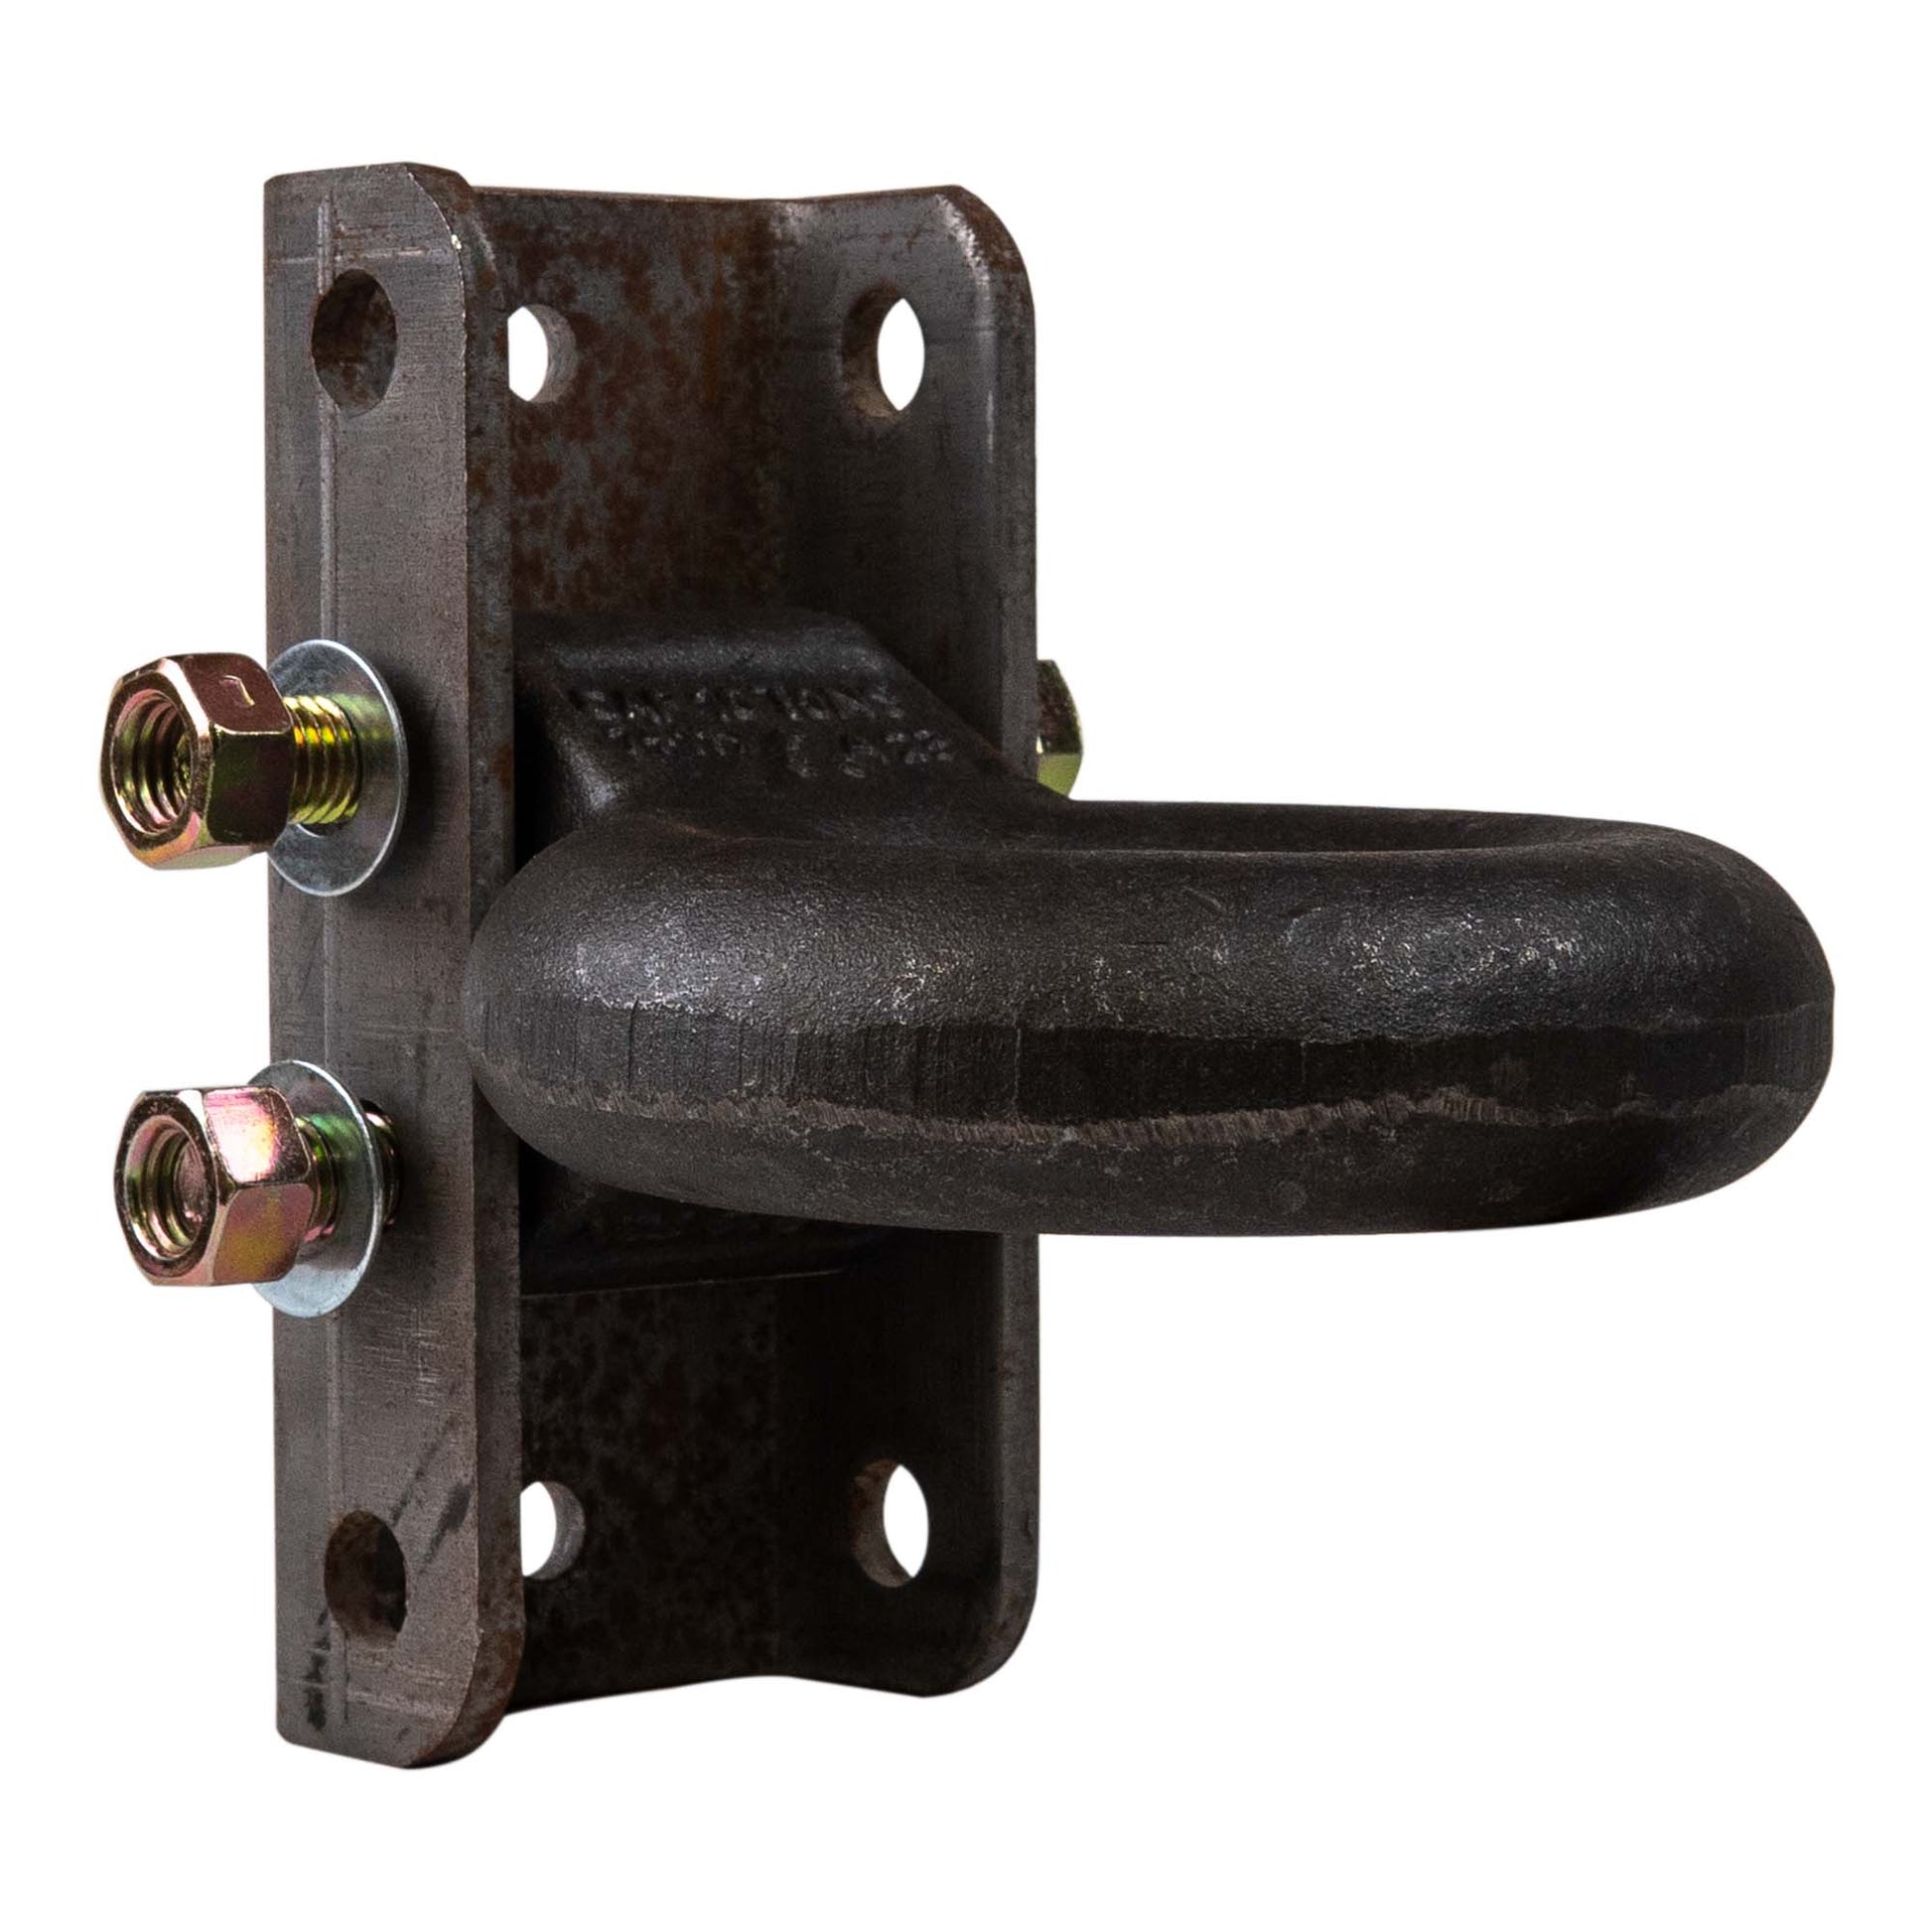 14K Forge Pintle Ring Trailer Coupler - 14000 lb Adjustable w/ channel - The Trailer Parts Outlet